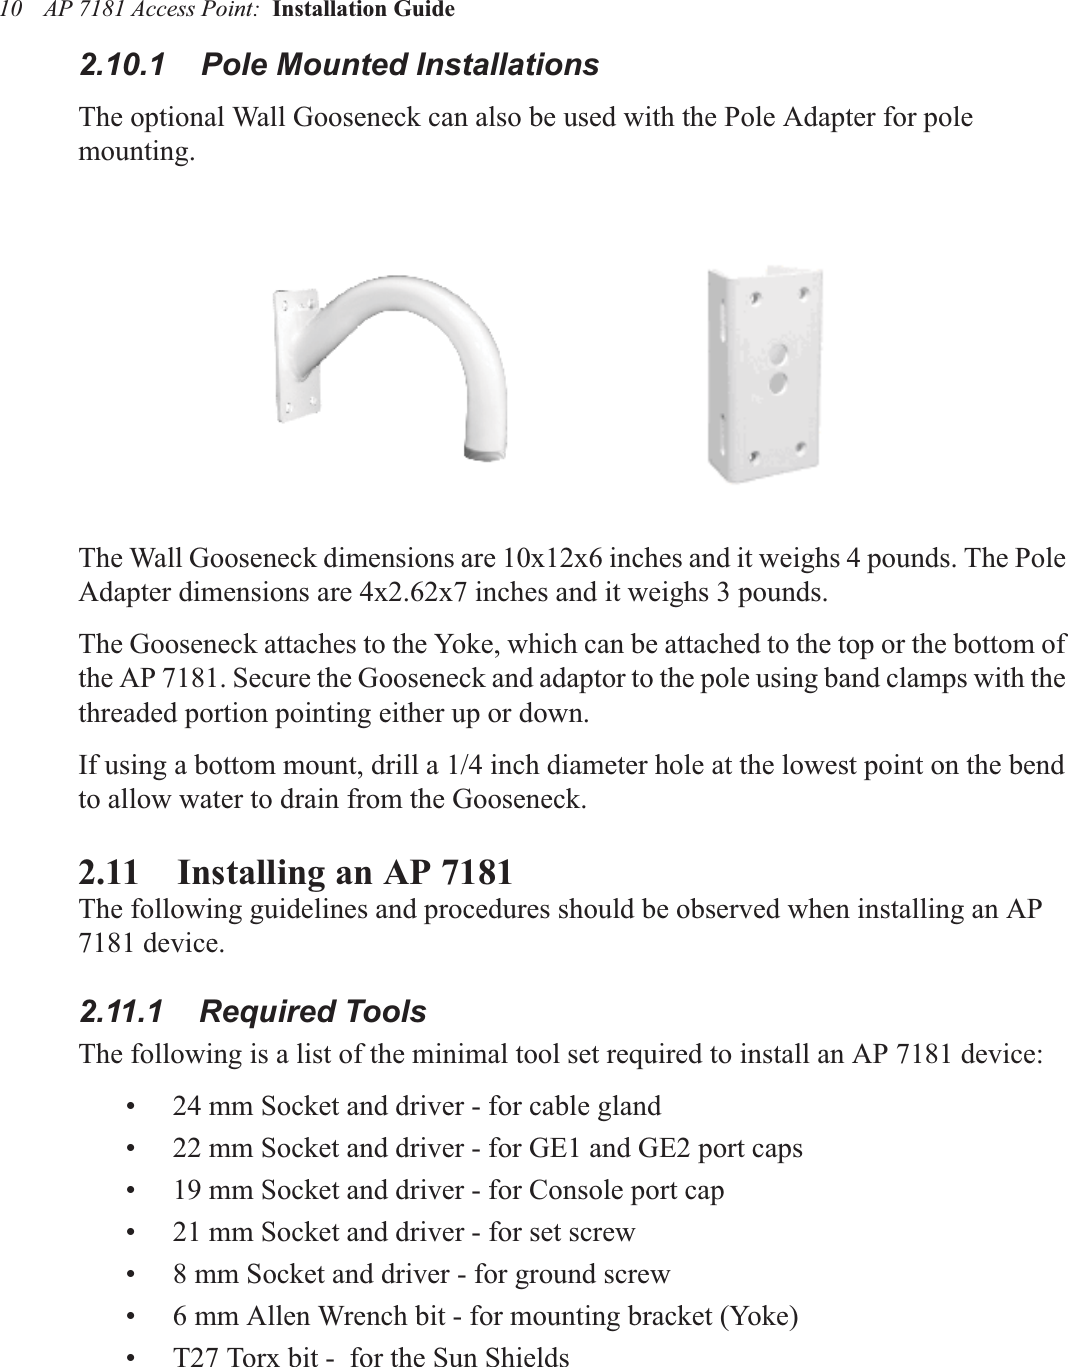 AP 7181 Access Point:  Installation Guide 102.10.1    Pole Mounted InstallationsThe optional Wall Gooseneck can also be used with the Pole Adapter for pole mounting.The Wall Gooseneck dimensions are 10x12x6 inches and it weighs 4 pounds. The Pole Adapter dimensions are 4x2.62x7 inches and it weighs 3 pounds.The Gooseneck attaches to the Yoke, which can be attached to the top or the bottom of the AP 7181. Secure the Gooseneck and adaptor to the pole using band clamps with the threaded portion pointing either up or down.If using a bottom mount, drill a 1/4 inch diameter hole at the lowest point on the bend to allow water to drain from the Gooseneck.2.11    Installing an AP 7181 The following guidelines and procedures should be observed when installing an AP 7181 device.2.11.1    Required ToolsThe following is a list of the minimal tool set required to install an AP 7181 device:• 24 mm Socket and driver - for cable gland• 22 mm Socket and driver - for GE1 and GE2 port caps• 19 mm Socket and driver - for Console port cap• 21 mm Socket and driver - for set screw• 8 mm Socket and driver - for ground screw• 6 mm Allen Wrench bit - for mounting bracket (Yoke)• T27 Torx bit -  for the Sun Shields